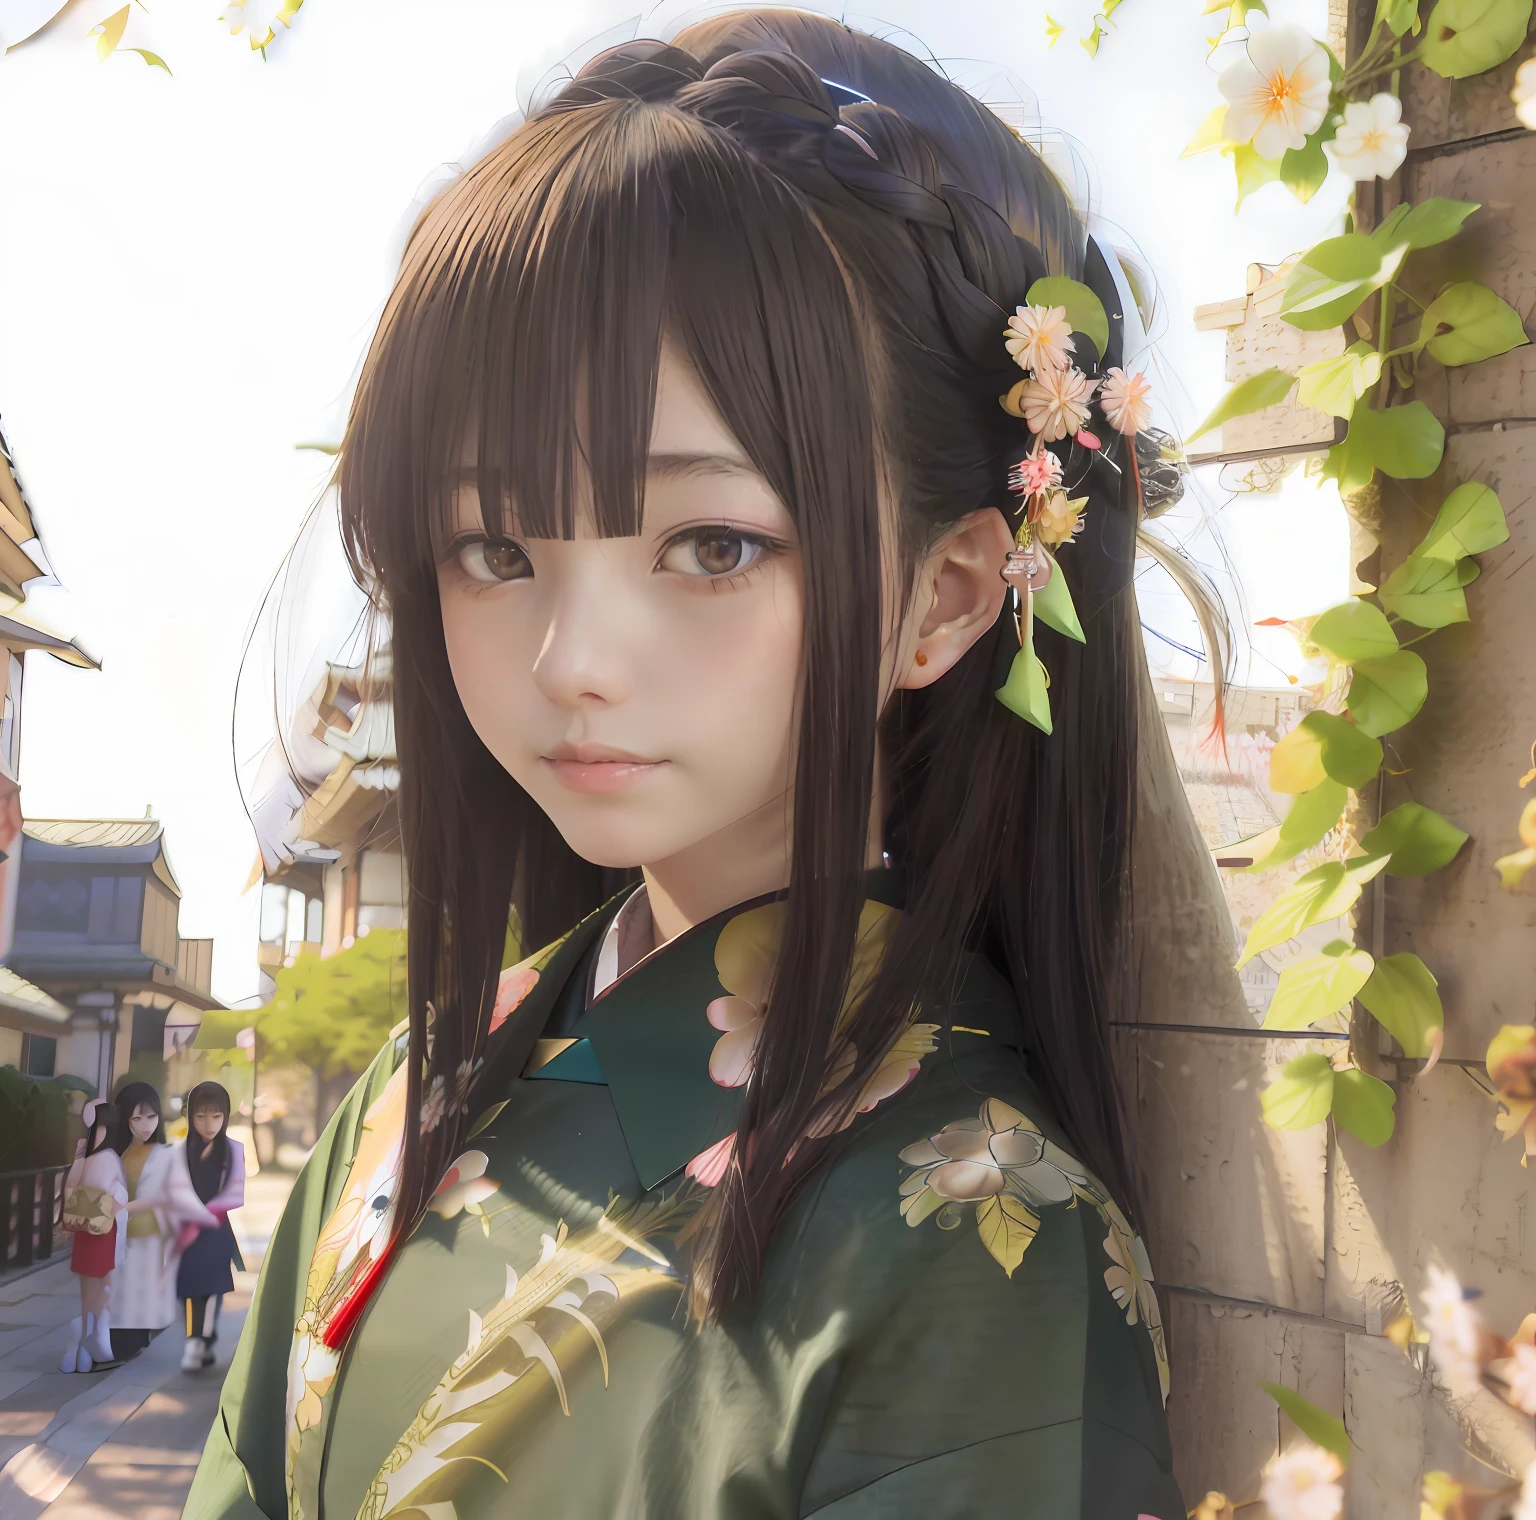 anime girl with long hair and flower in her hair, Guviz-style artwork, Guviz, Realistic anime 3 D style, Photorealistic anime, 3 d anime realistic, Realistic young anime girl, Palace ， A girl in Hanfu, a beautiful anime portrait, photorealistic anime girl rendering, Kawaii realistic portrait, Smooth anime CG art, Beautiful anime girl